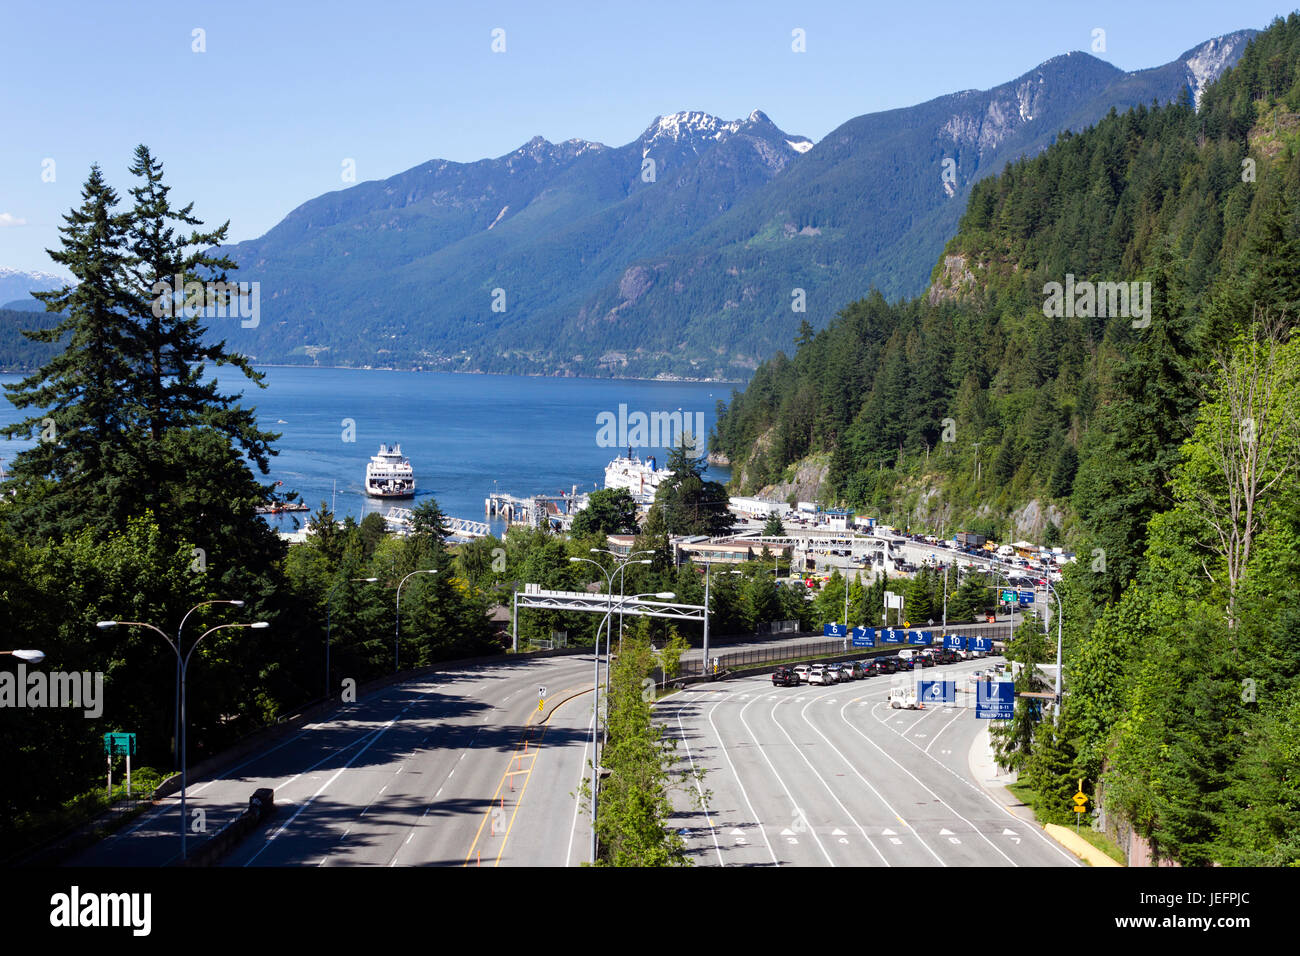 View of Horseshoe Bay ferry terminal located in Horseshoe Bay, West Vancouver, British Columbia, Canada. Stock Photo